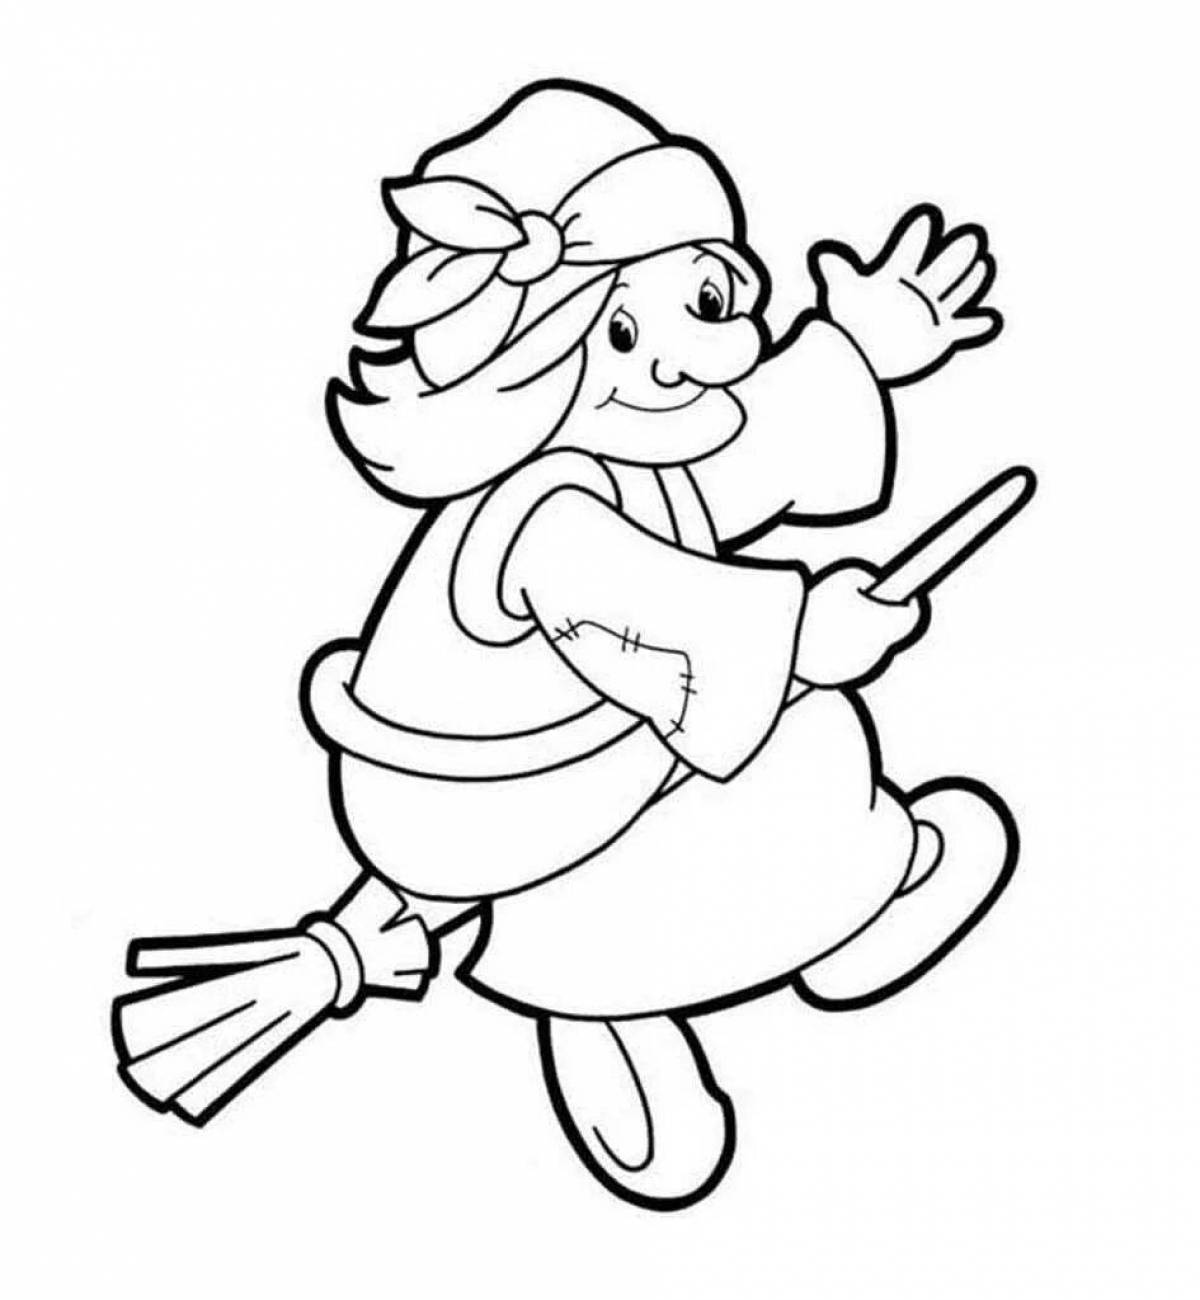 Funny coloring pages heroes of fairy tales for children